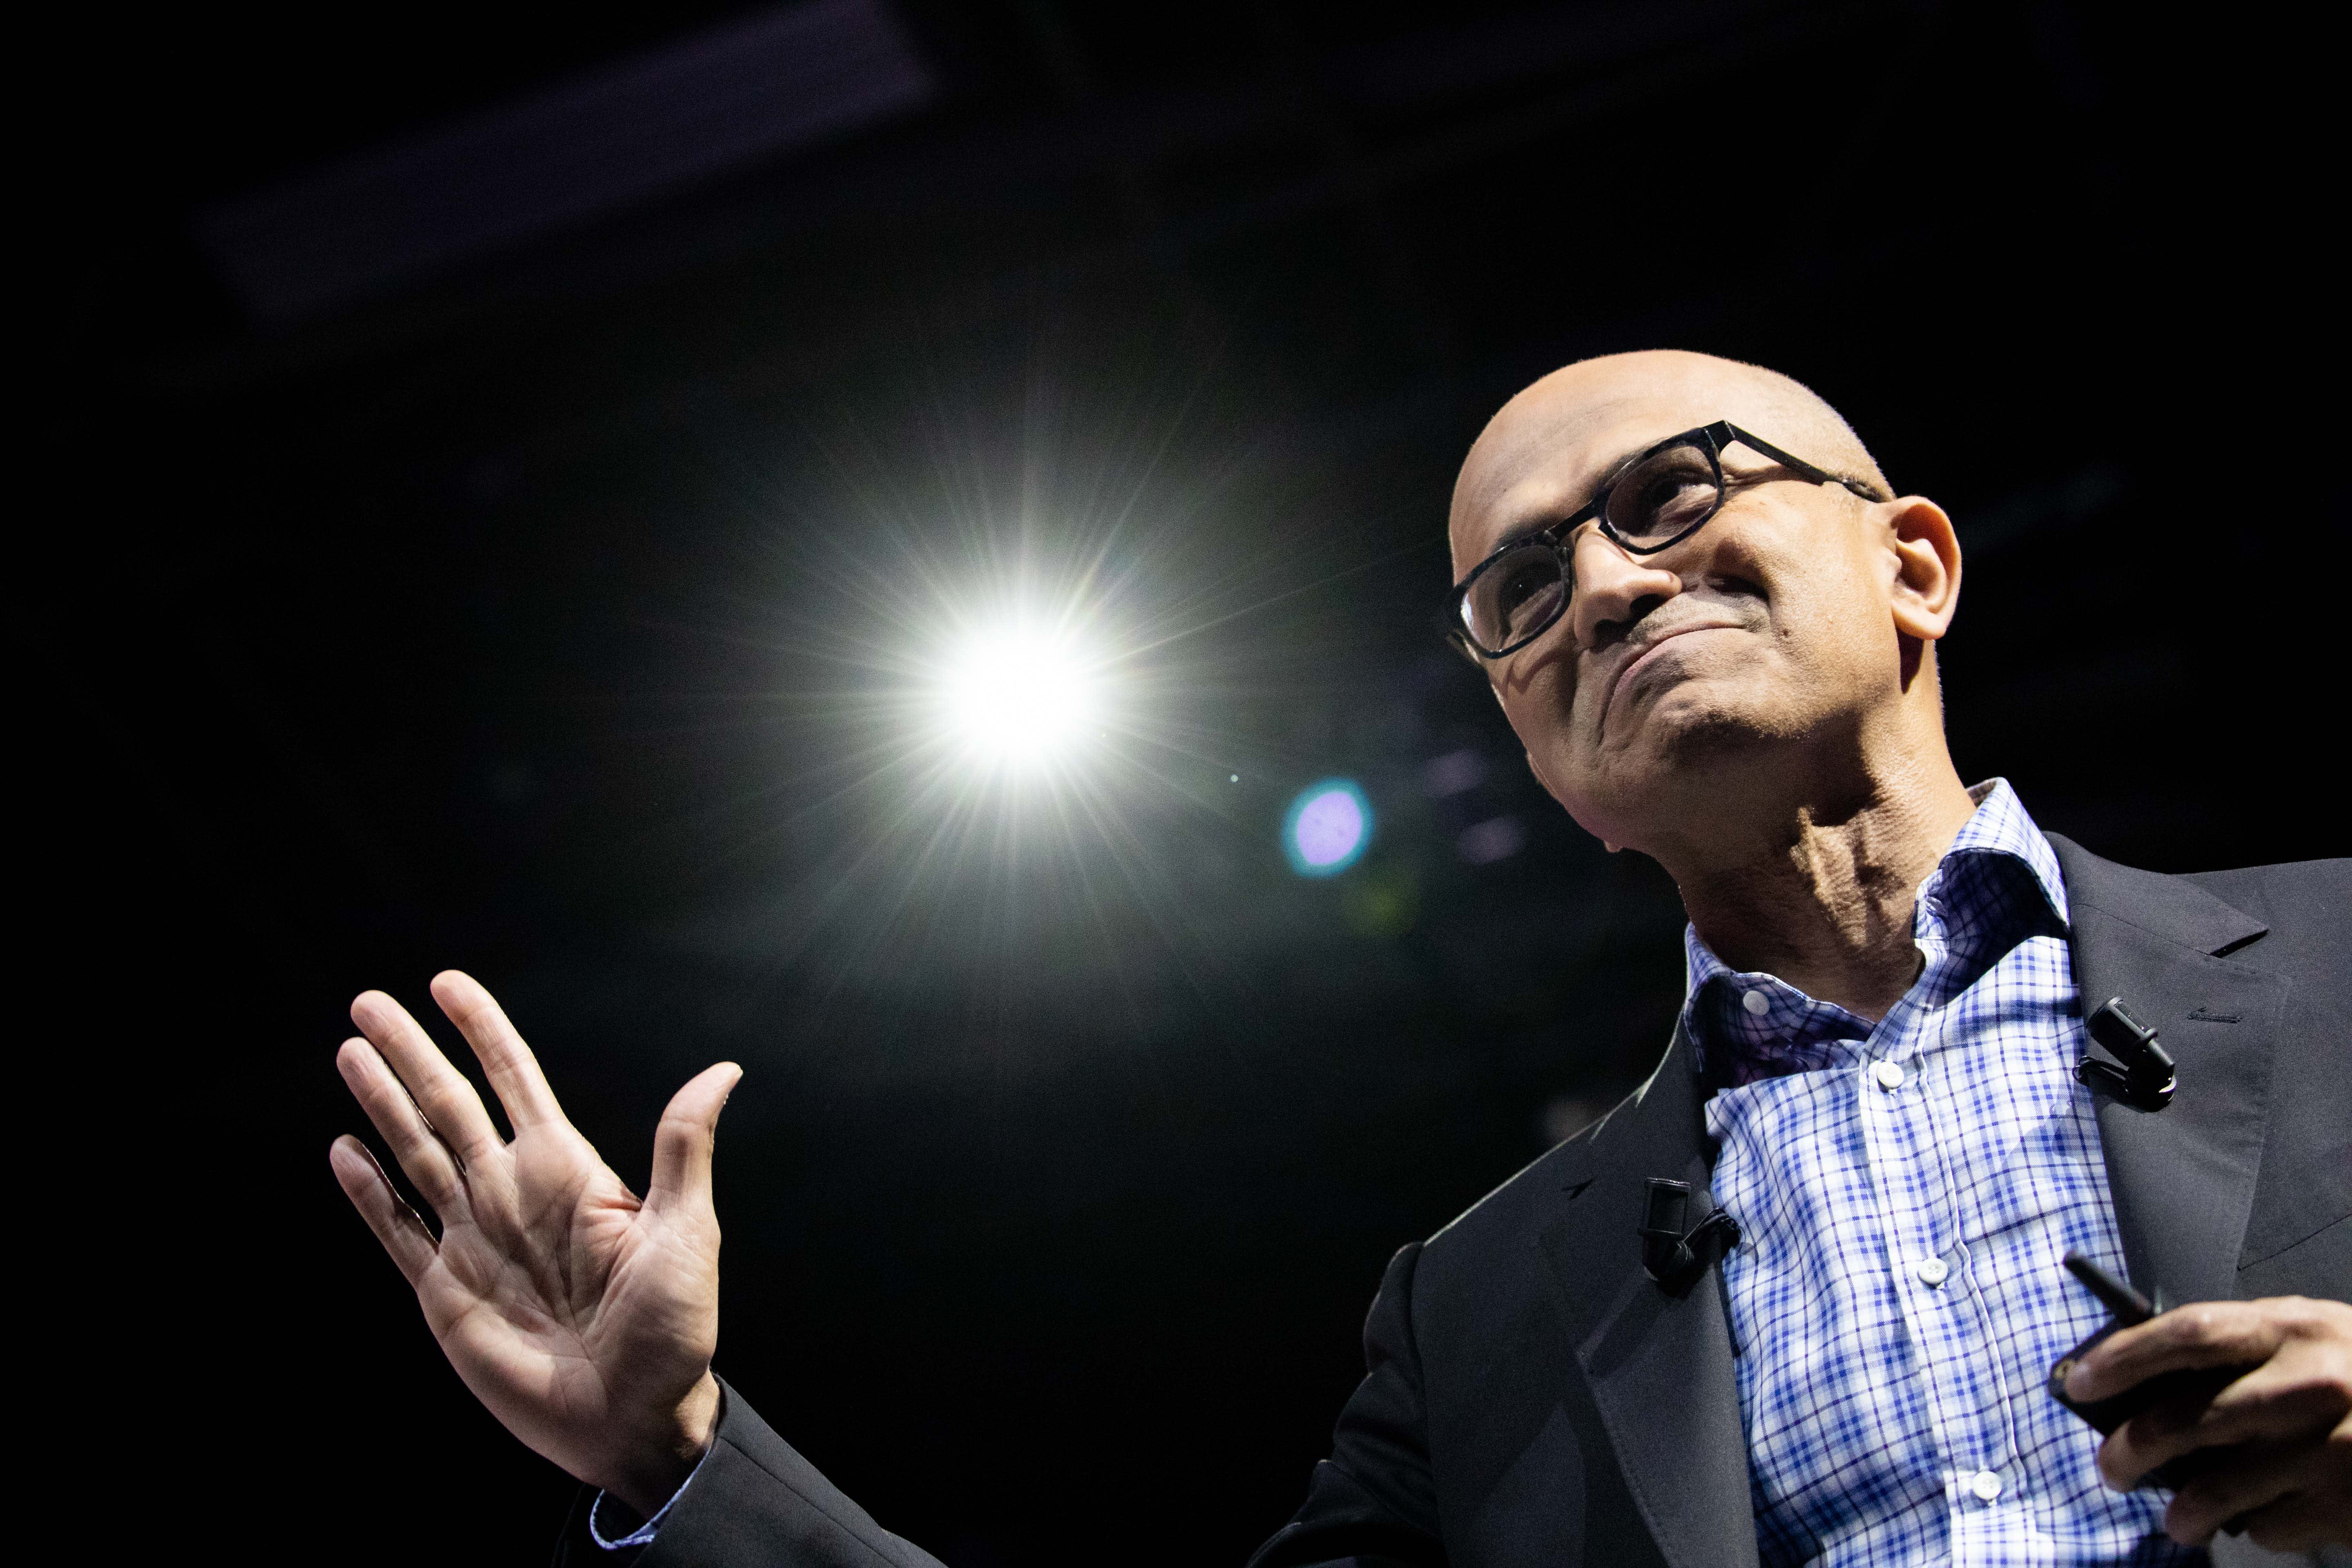 Microsoft forecast spurs relief rally and shows top companies positioned to weather rising inflation